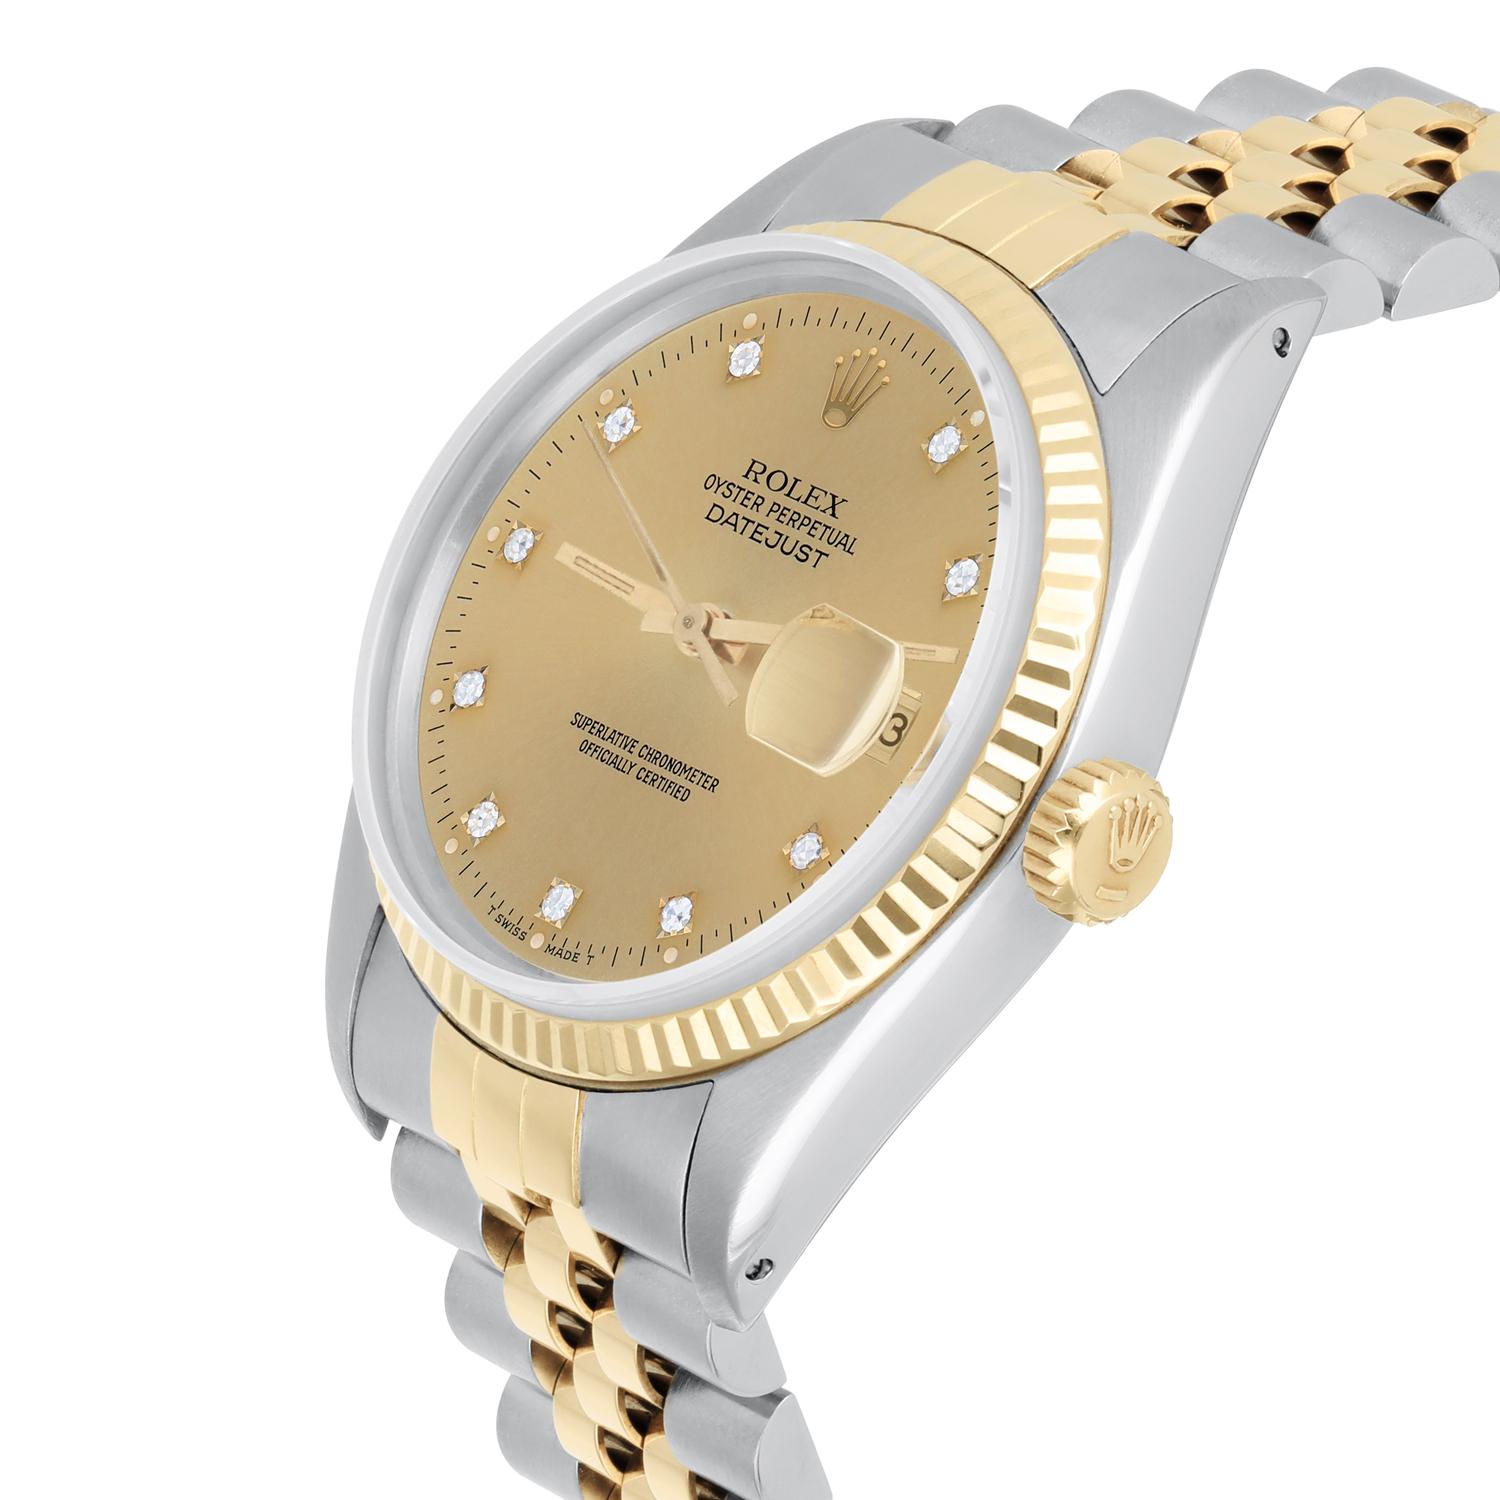 Rolex Datejust 36mm Two Tone Champagne Diamond Dial Jubilee 16013 Circa 1987 In Excellent Condition For Sale In New York, NY